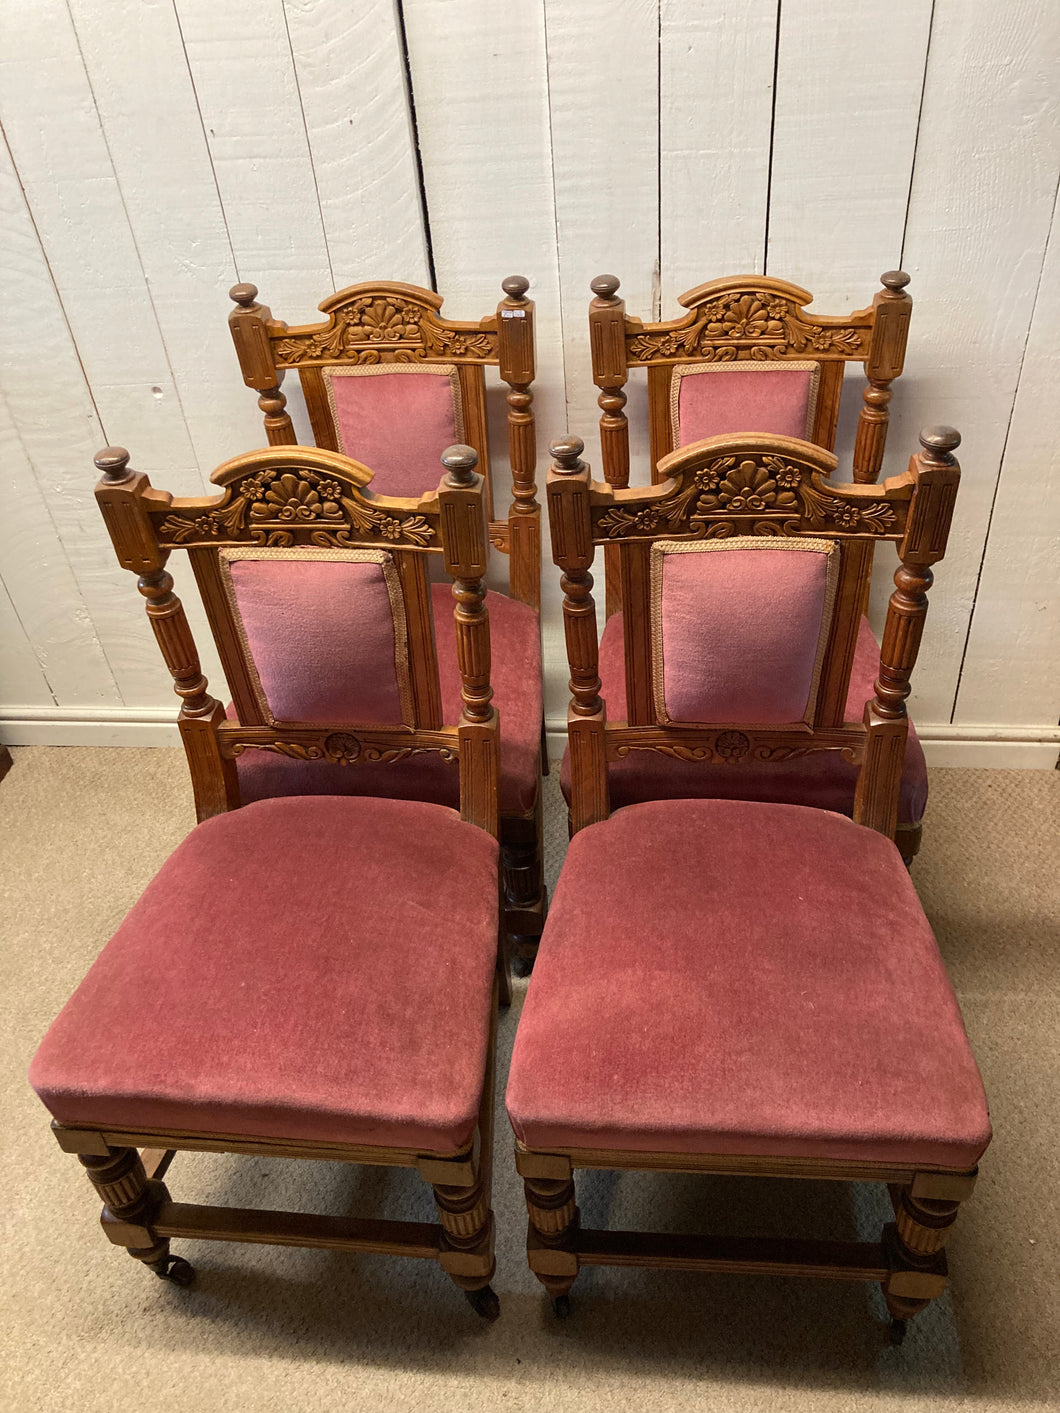 Antique Set Of Four Oak Carved Chairs Upholstered In Pink Velour Castors To Front Legs